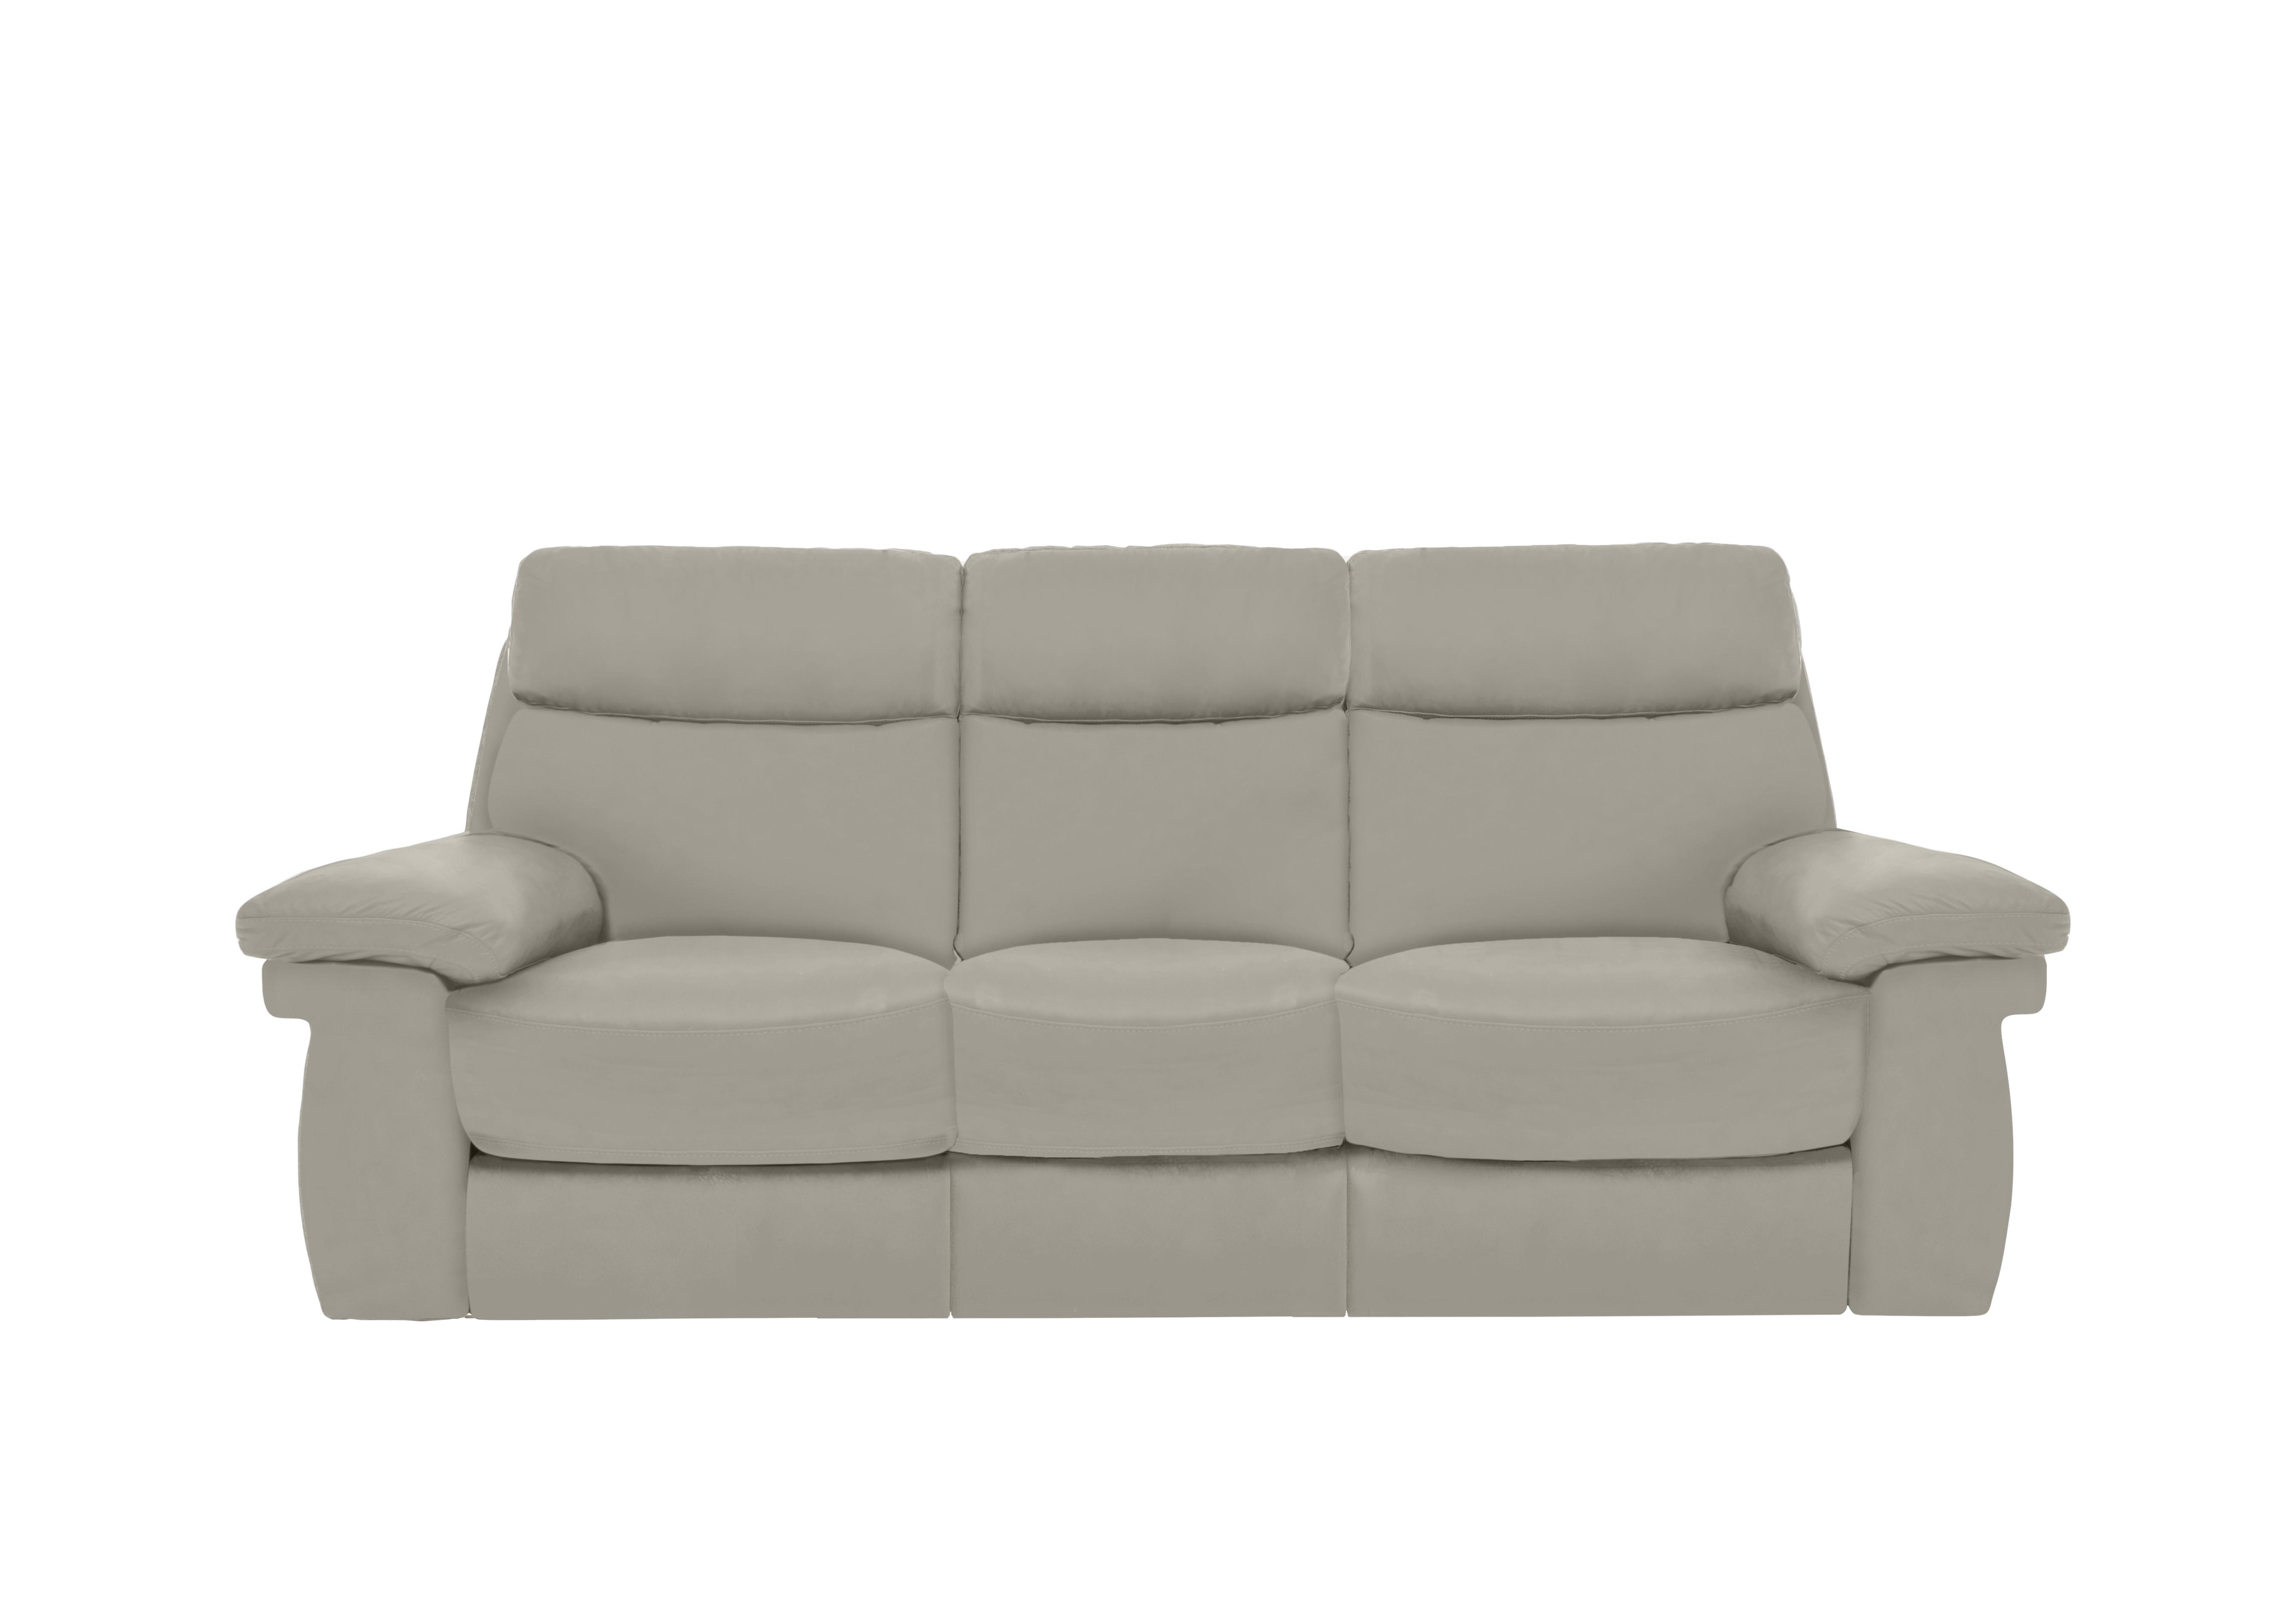 Serene 3 Seater Leather Sofa in Bx-251e Grey on Furniture Village